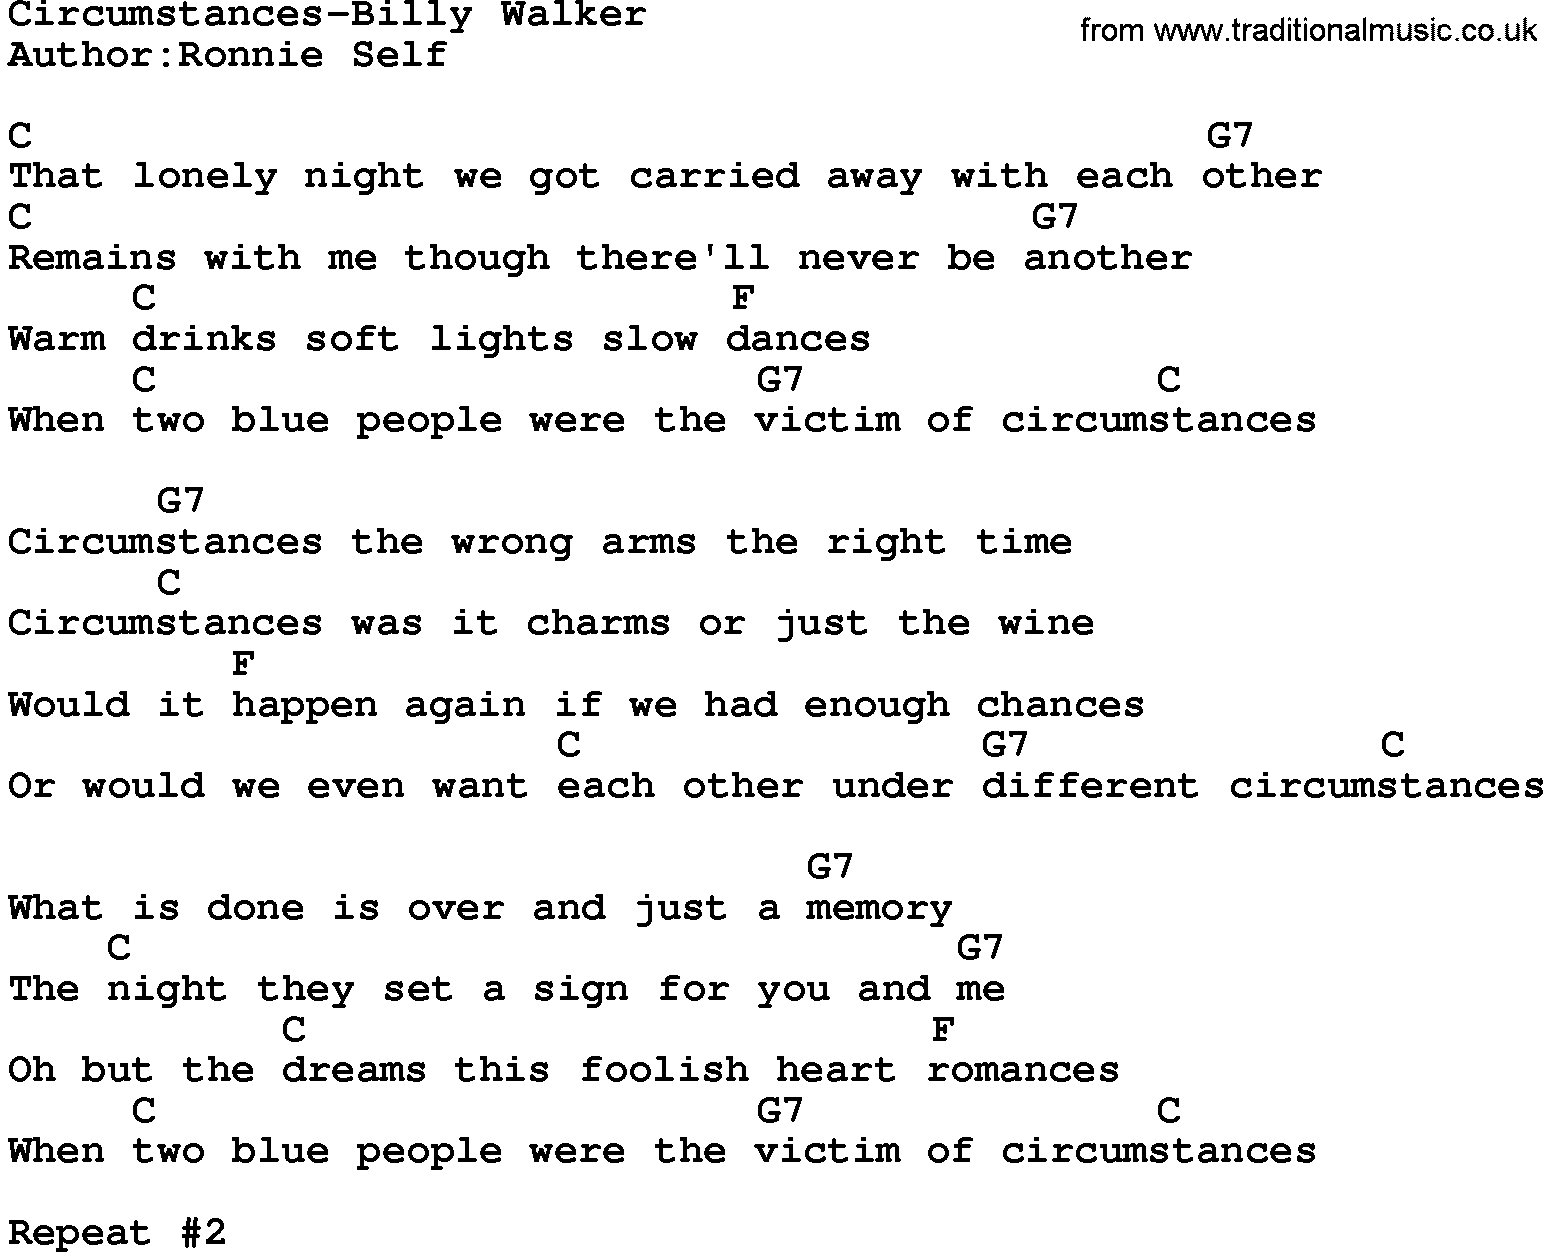 Country music song: Circumstances-Billy Walker lyrics and chords